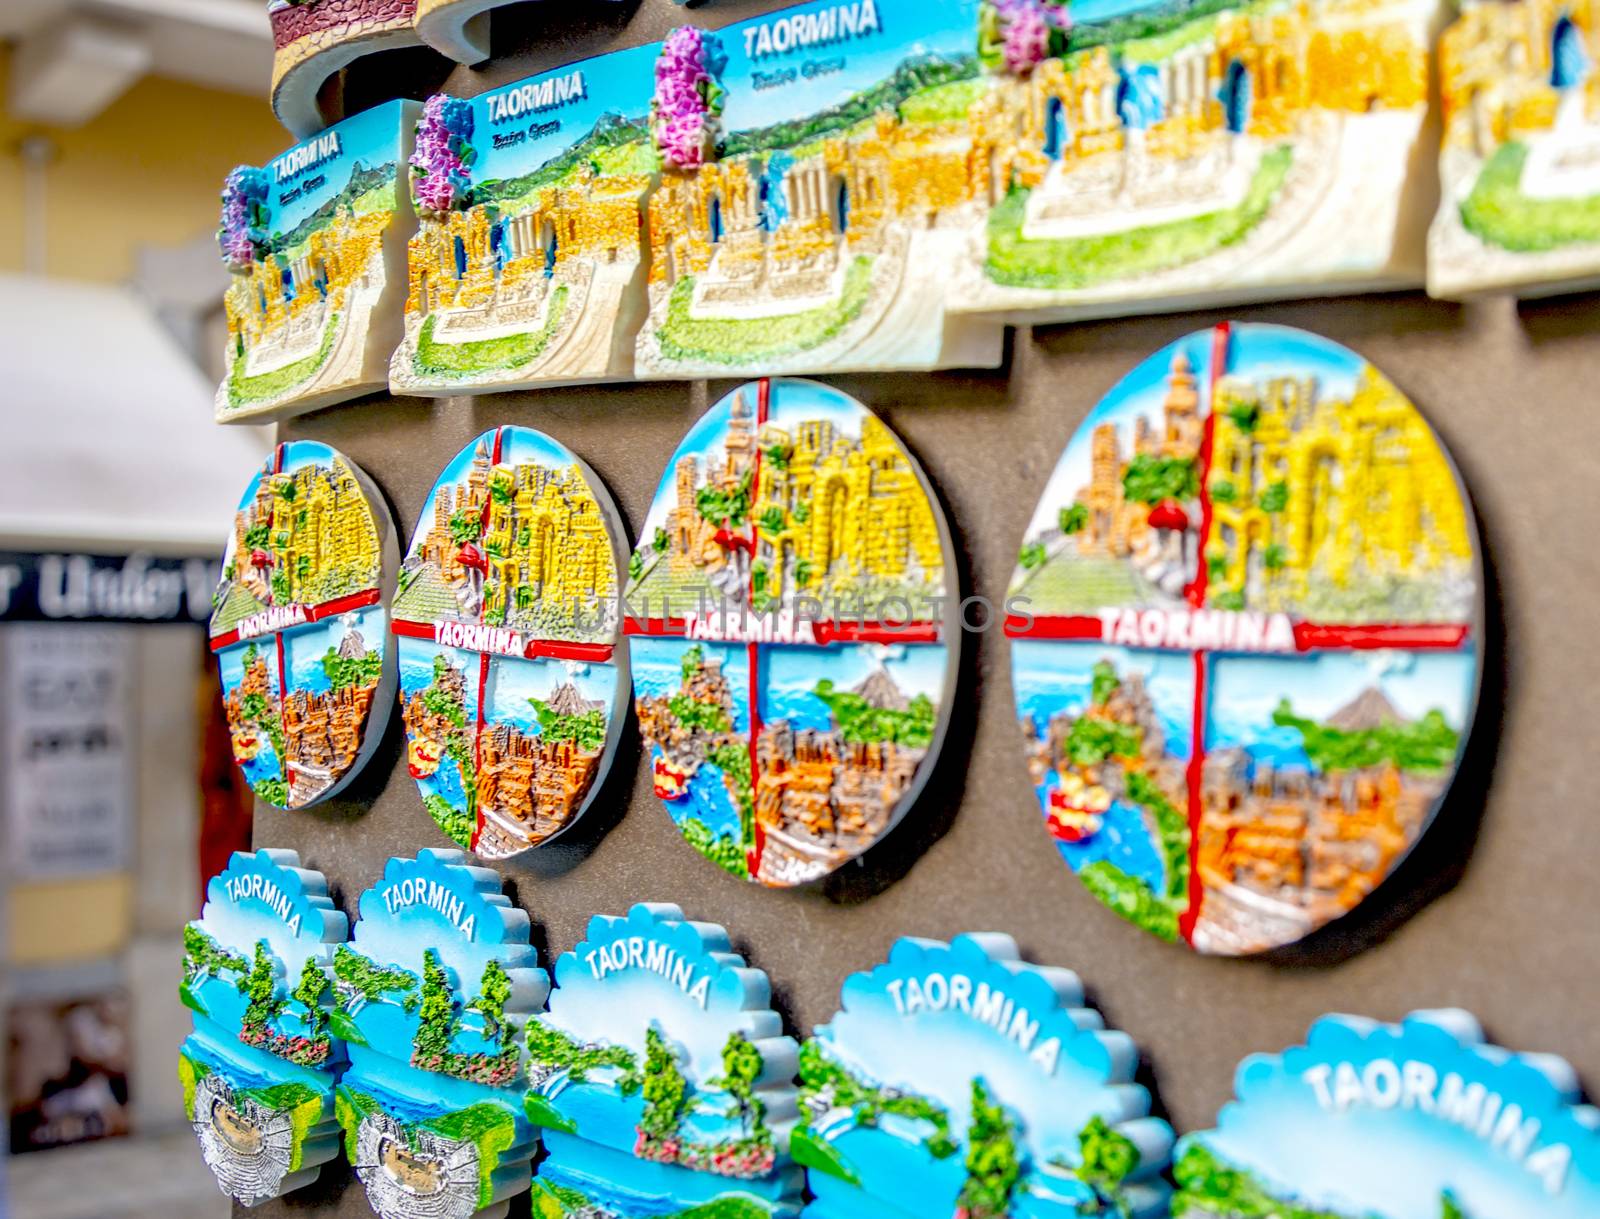 Magnetic travel souvenirs of Taormina in Sicily, Italy